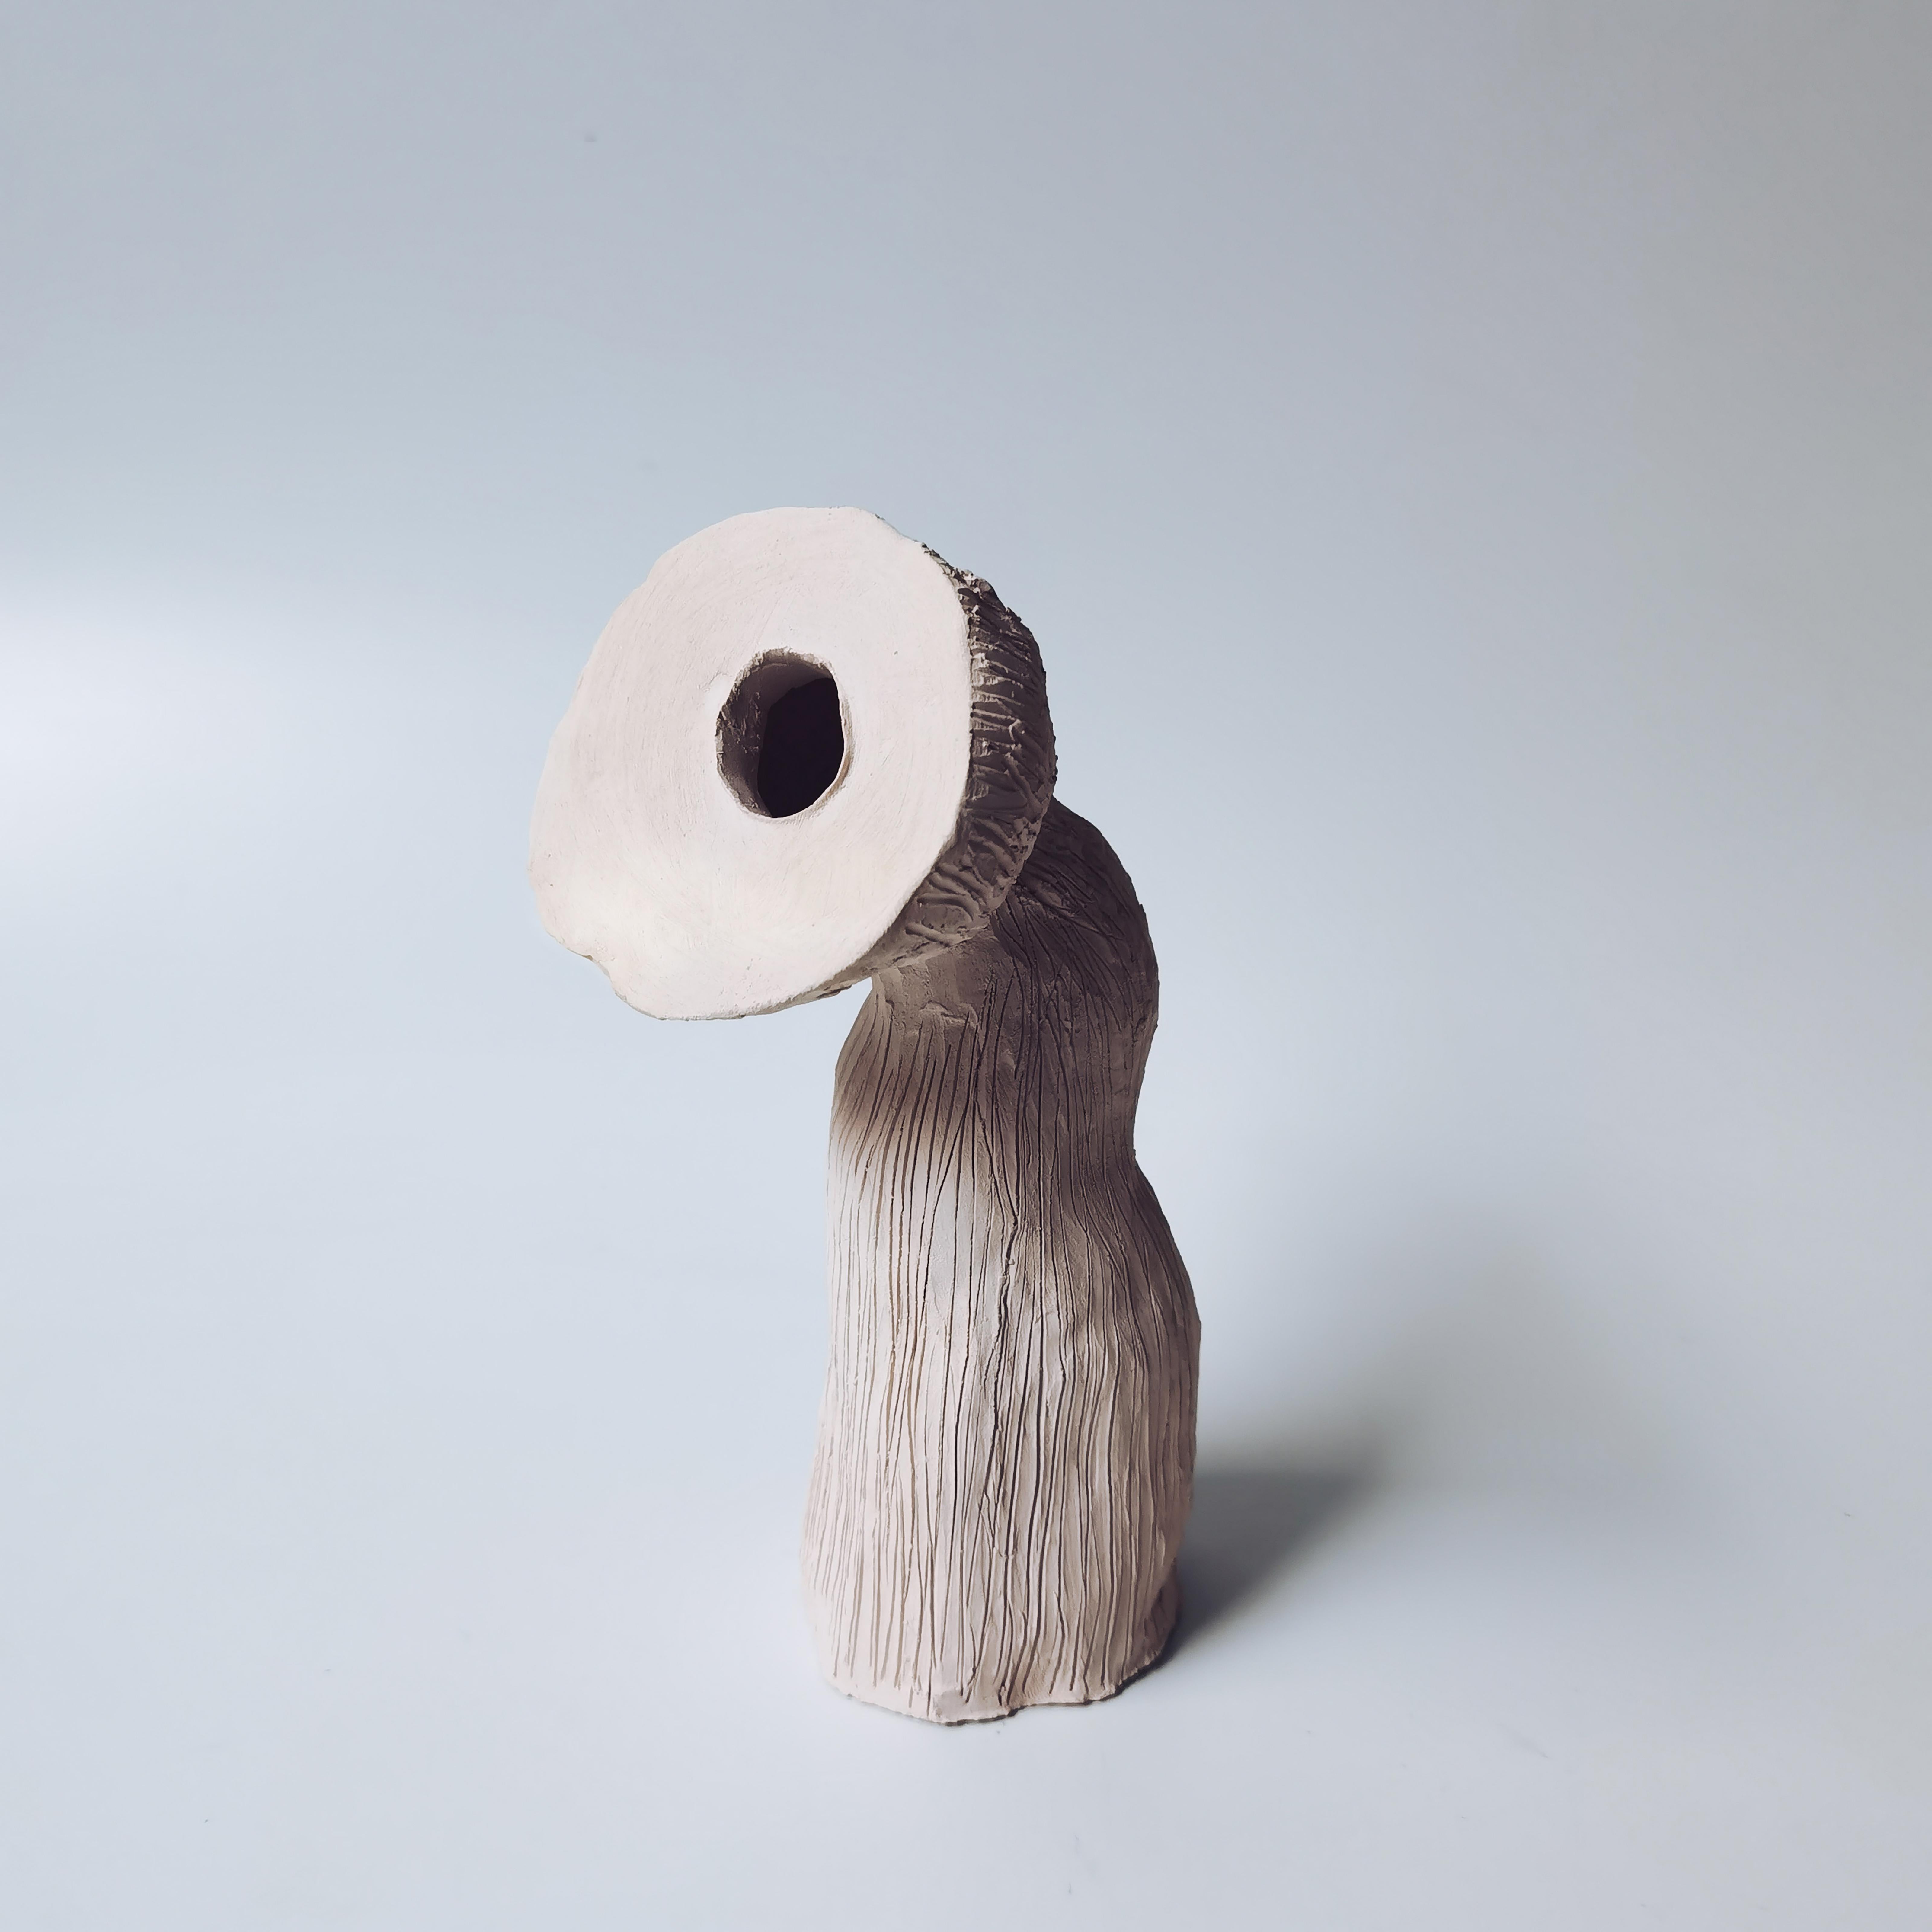 One pod, one stem small by Jan Ernst
Dimensions: H 25 cm
Materials: White stoneware

Jan Ernst’s work takes on an experimental approach, as he prefers making bespoke pieces by hand. His organic design stems from his
abstract understanding of